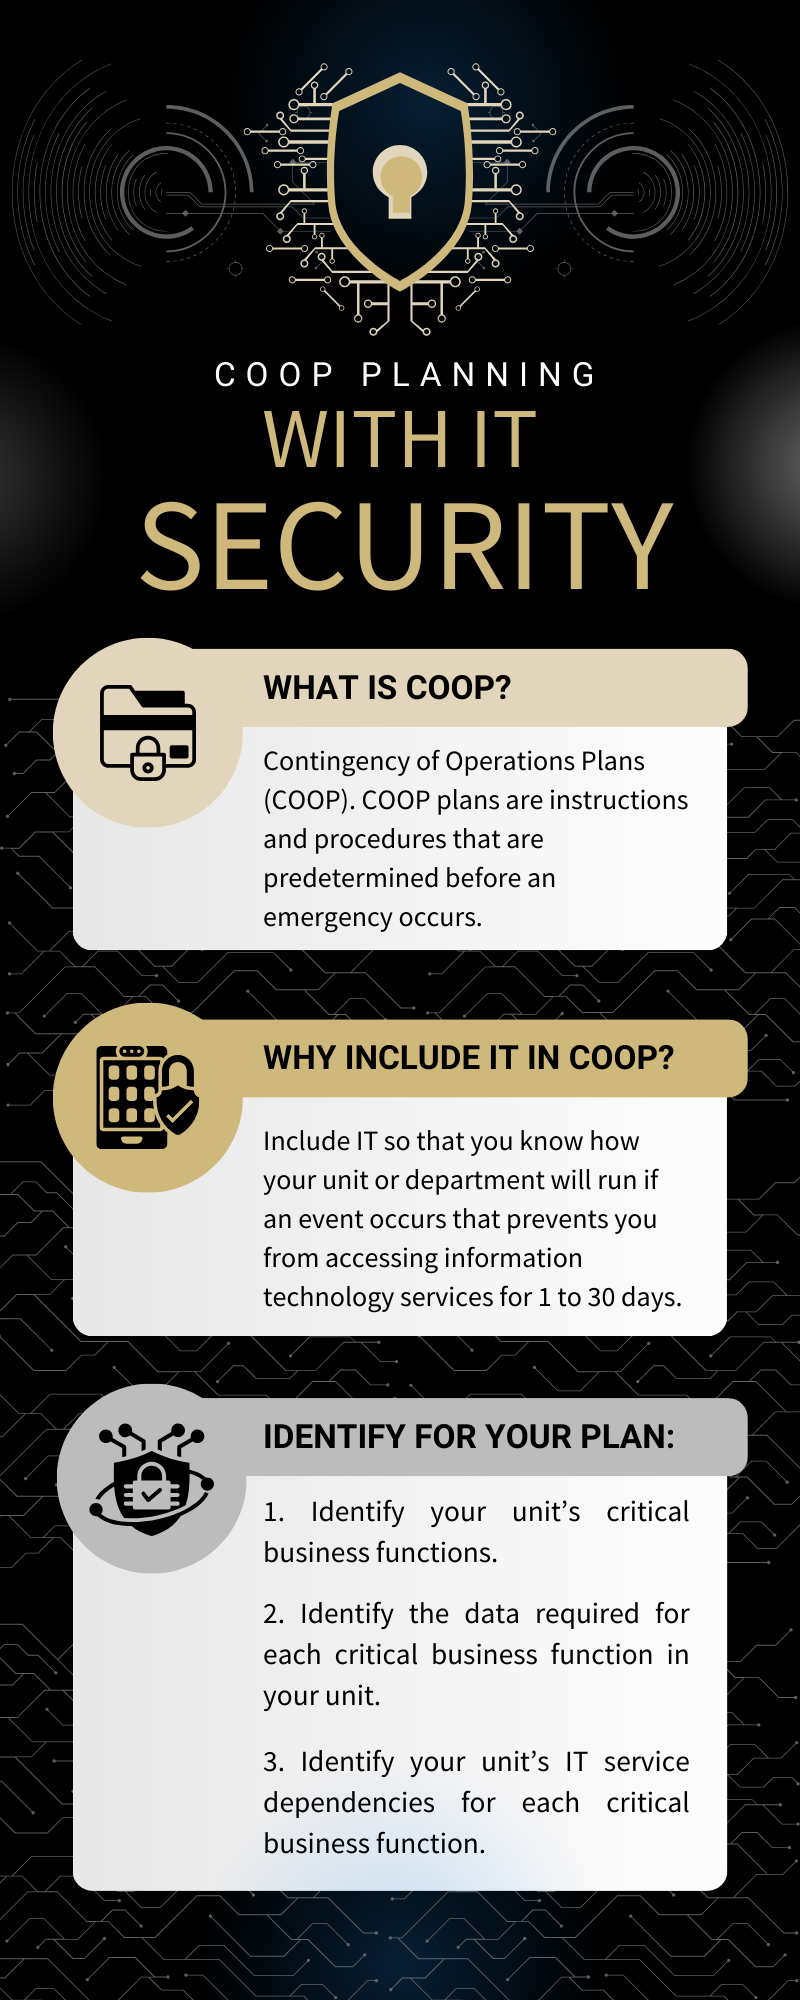 Infographic summarizing the three main questions to ask when planning your COOP: IT business functions, data required for critical business, IT service dependencies.